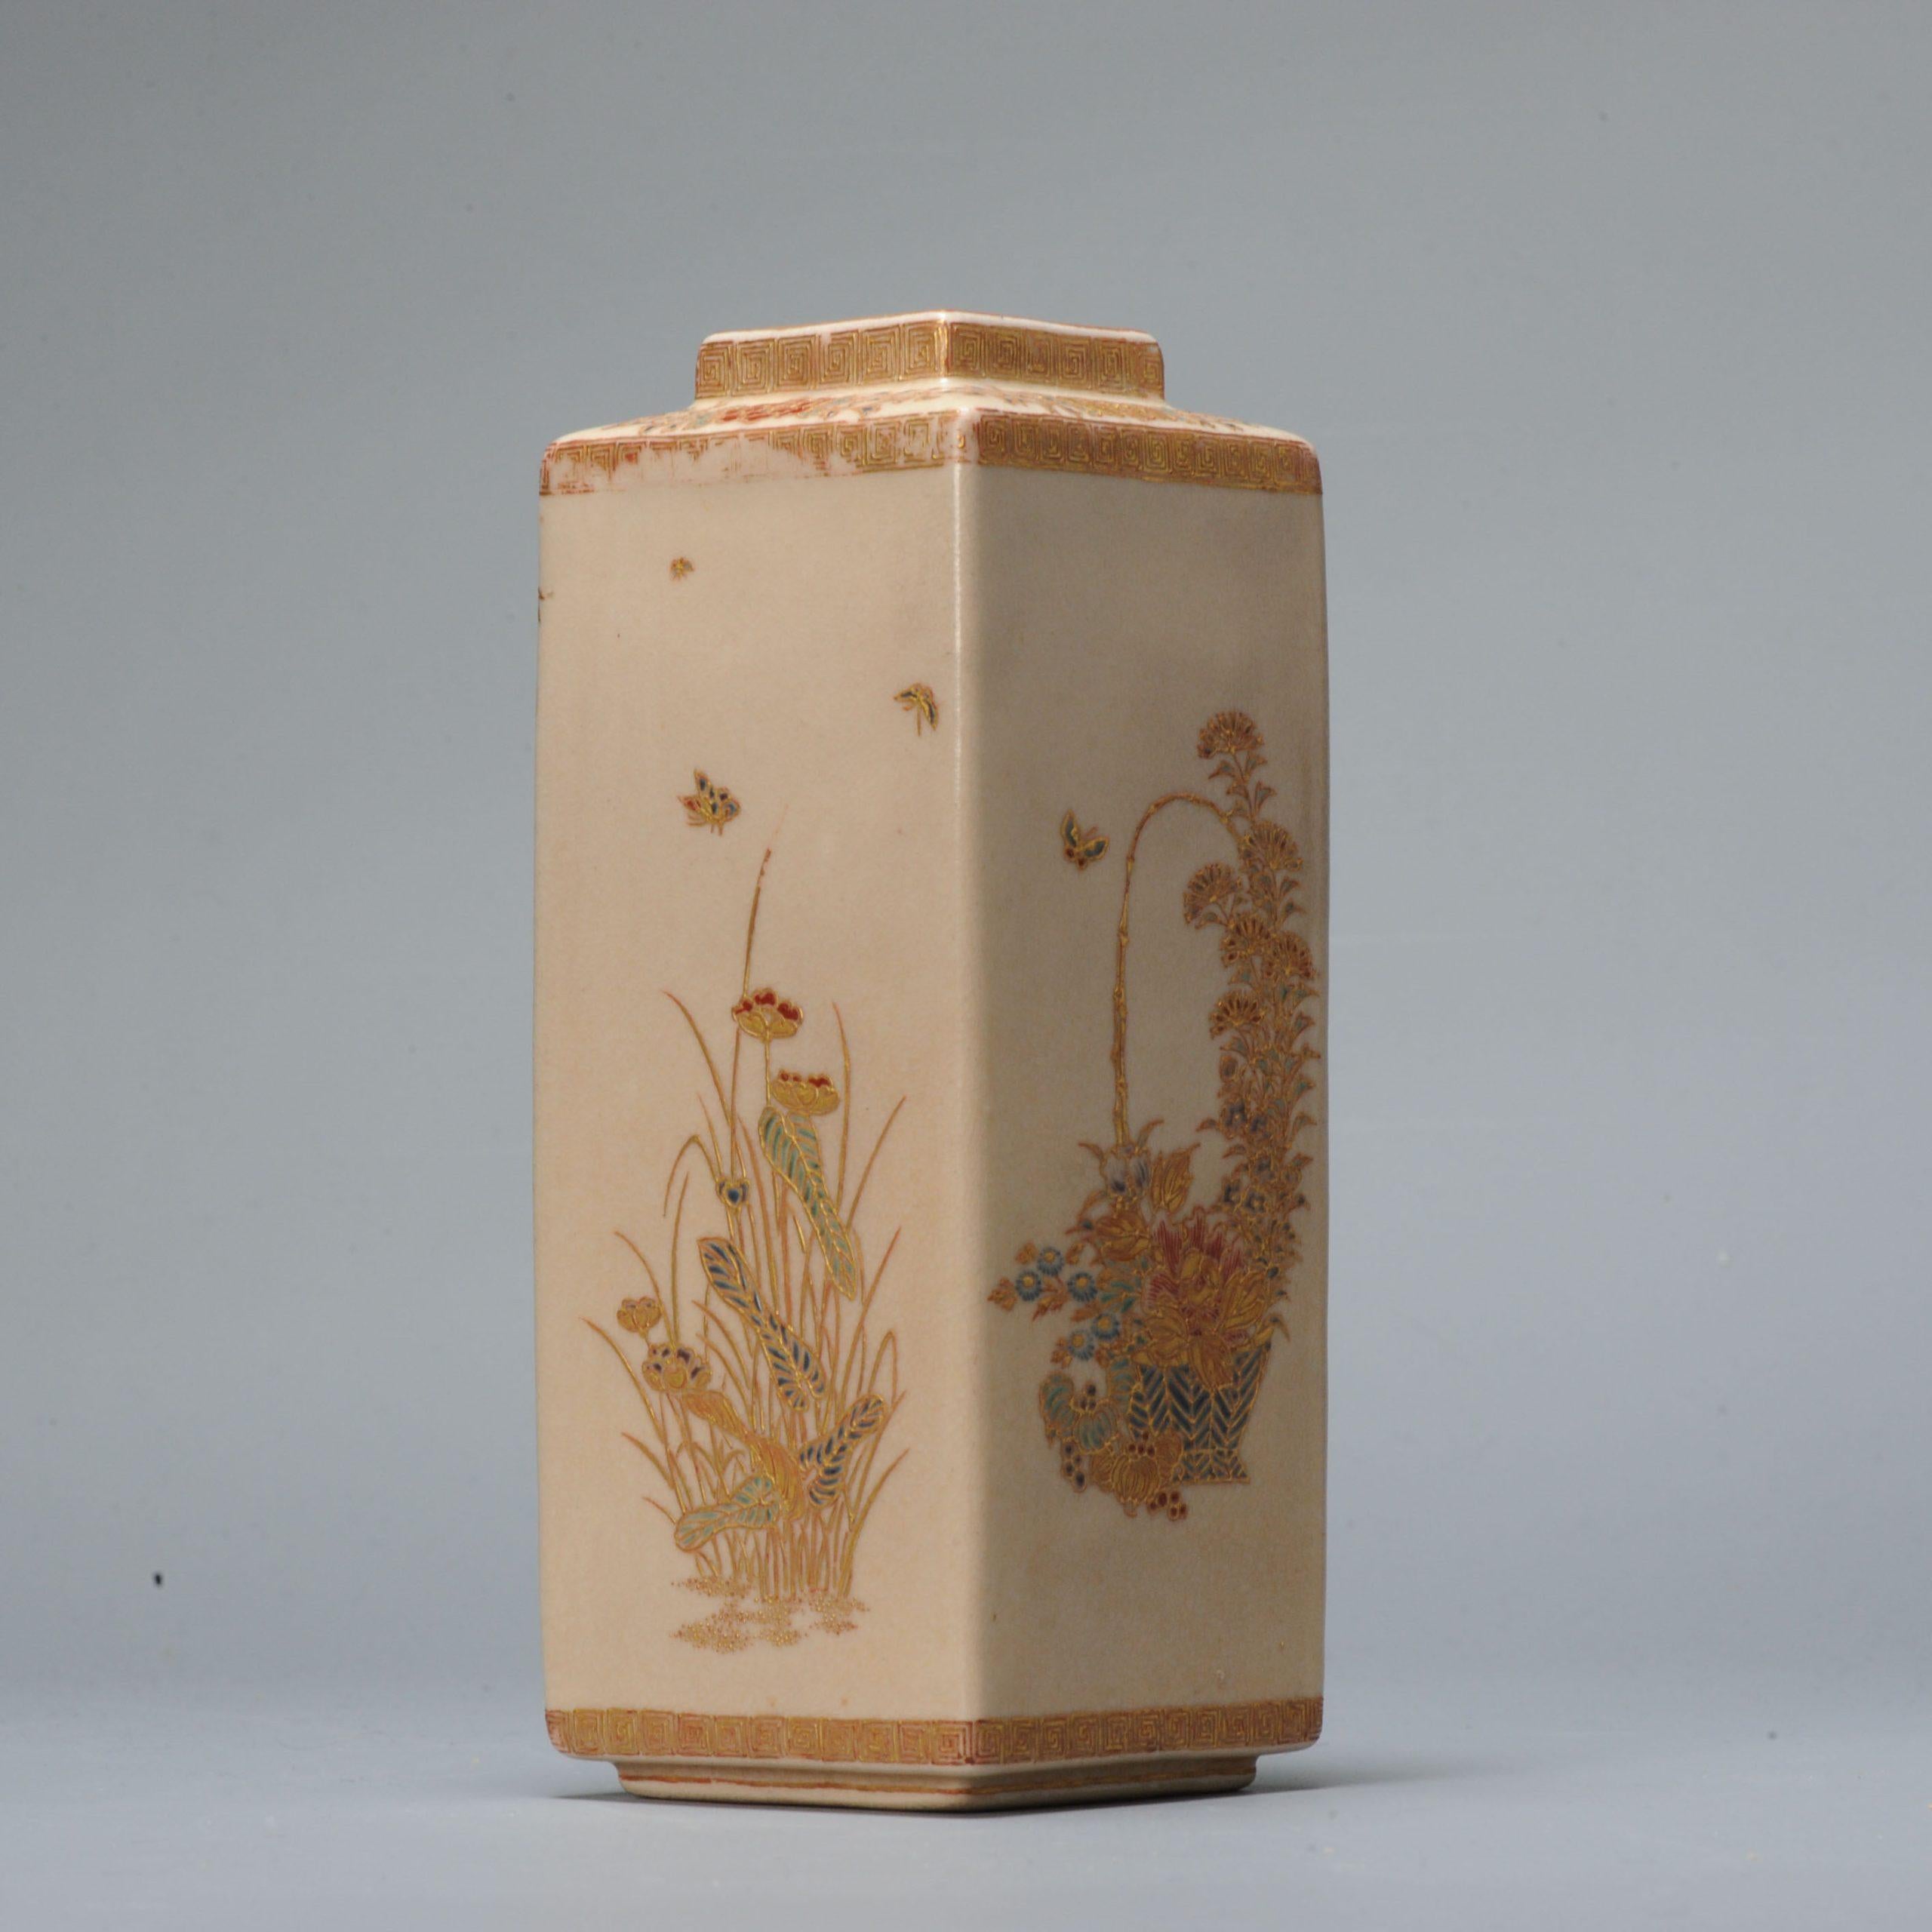 Fabulous Japanese earthenware Satsuma vase with nice decoration of flowers and butterflies, marked. Meiji period, 19th c. Lovely piece.

Additional information:
Material: Porcelain & Pottery
Japanese Style: Satsuma
Region of Origin: Japan
Period: